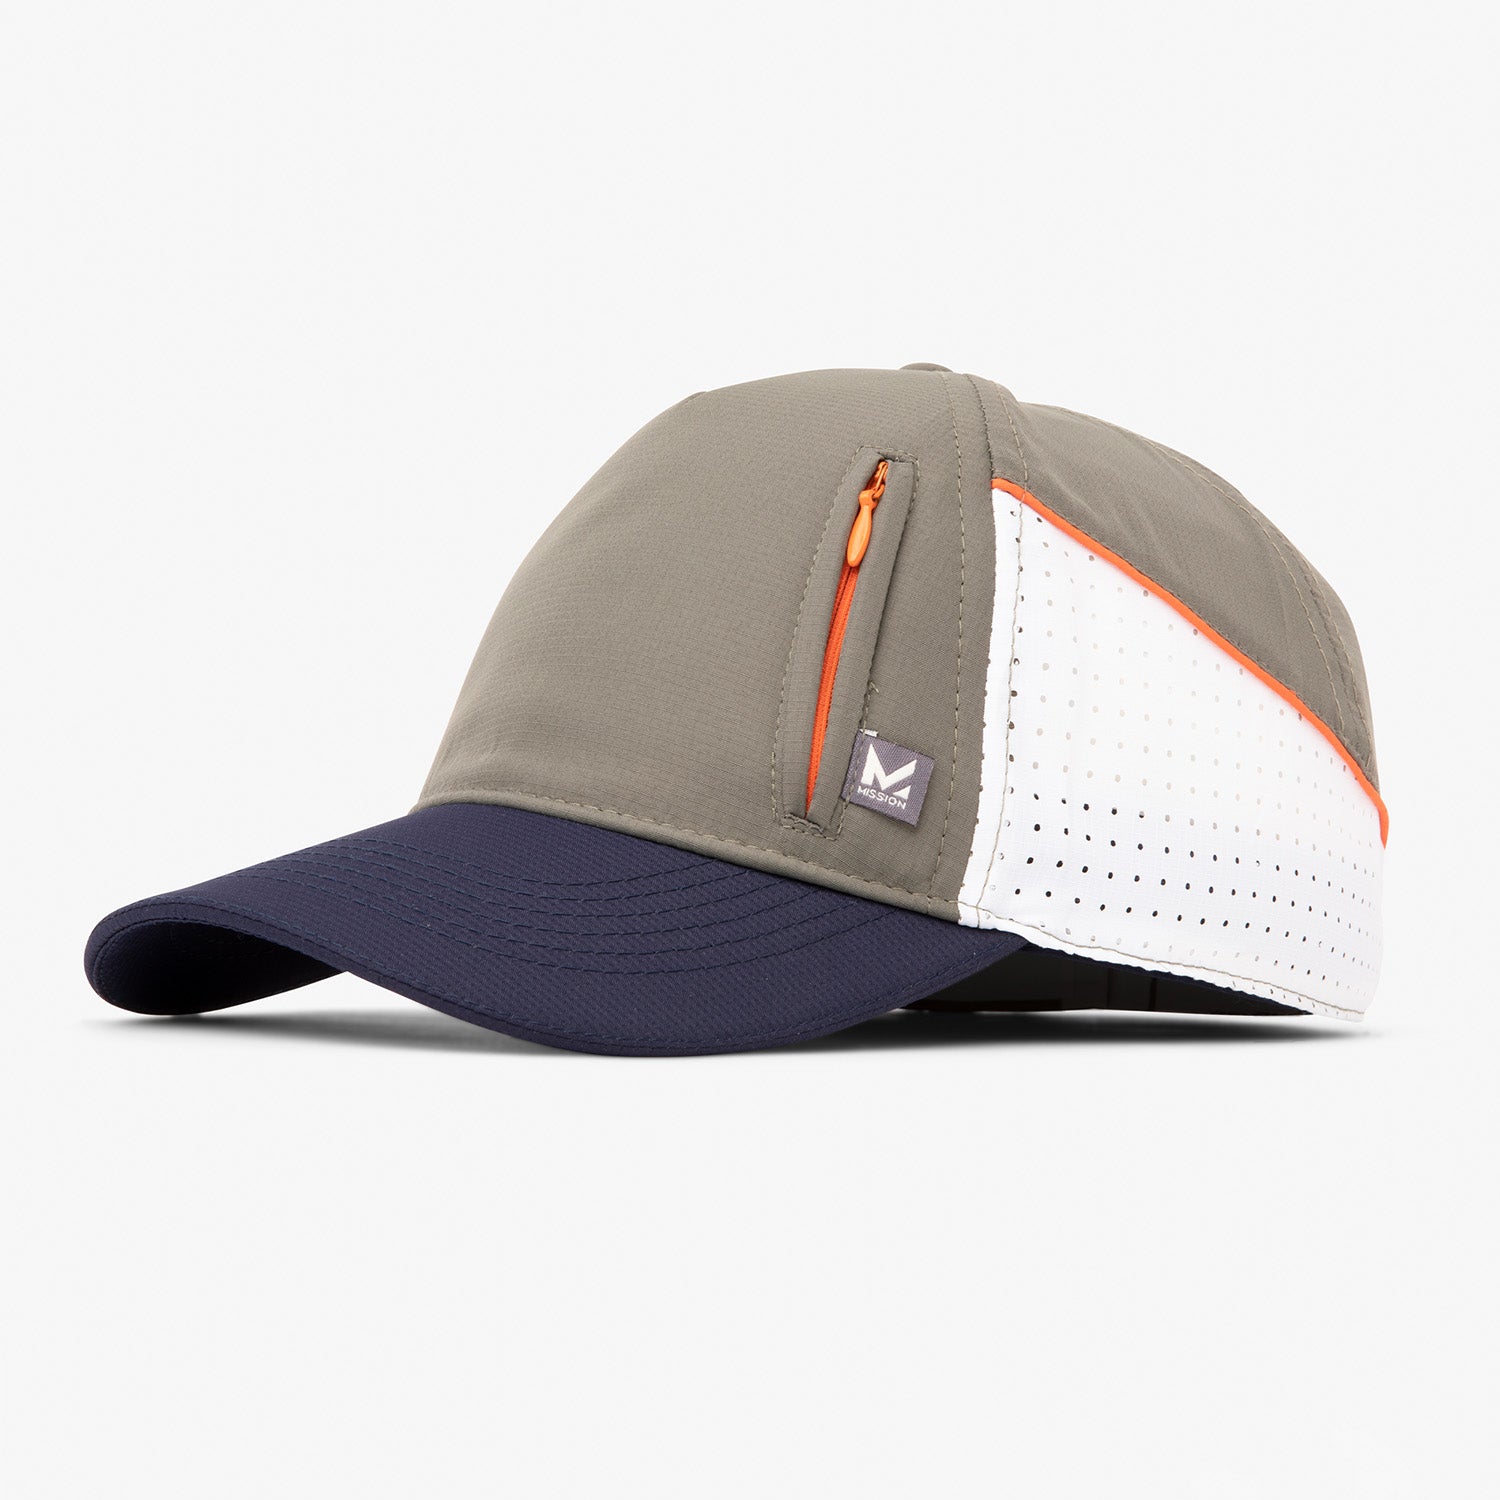 Cooling Summit Hat Caps MISSION Olive White One Size 